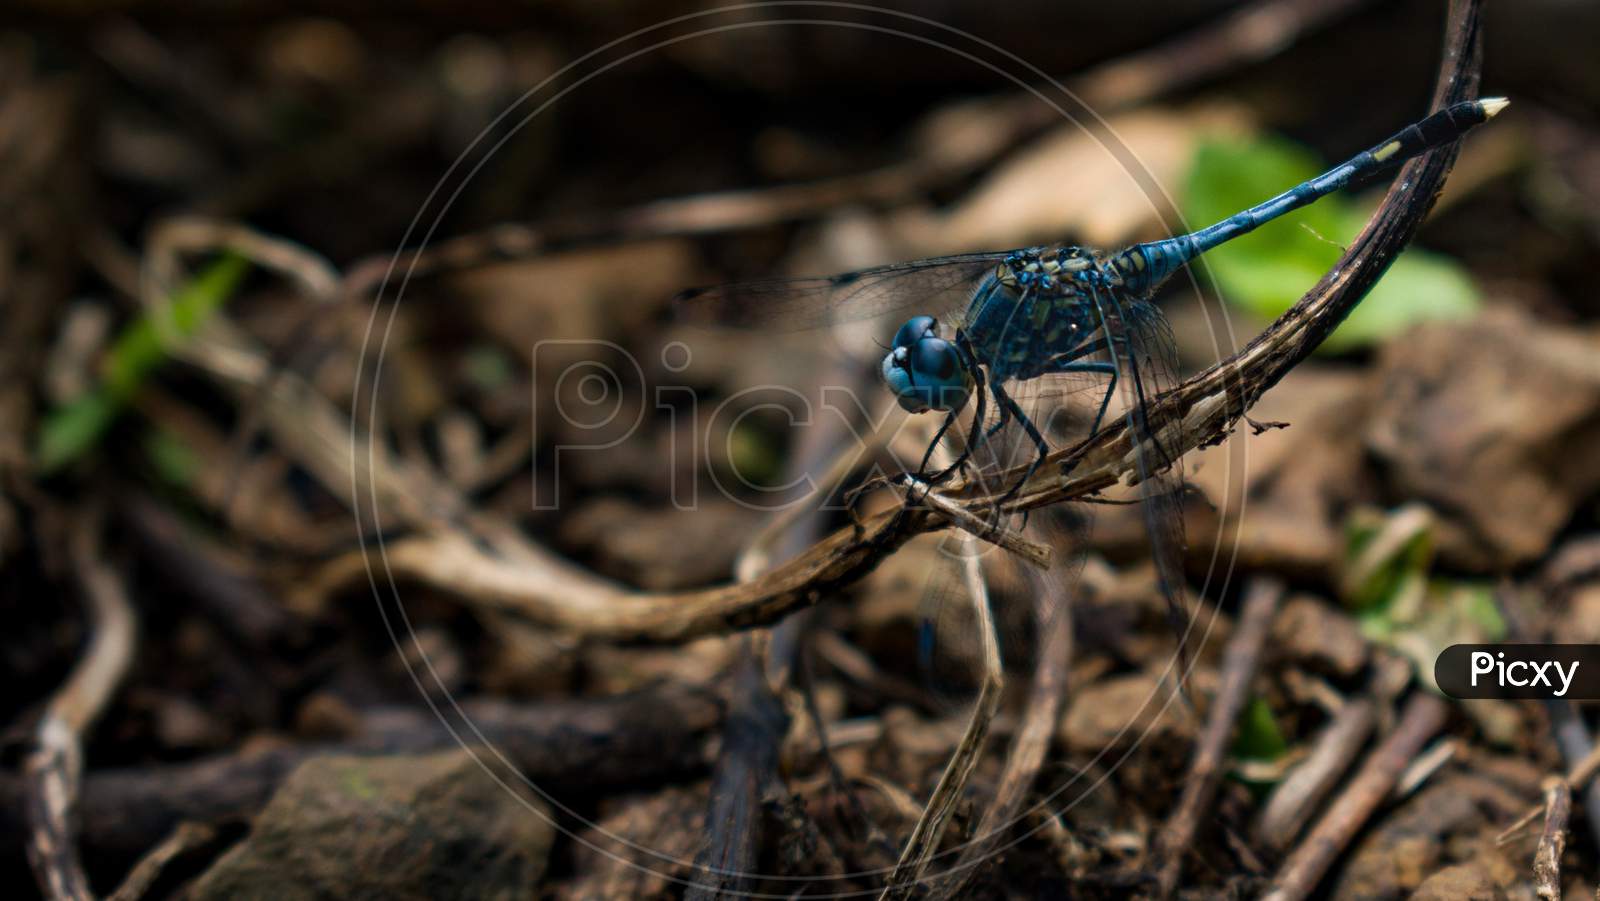 blue dragonfly on ground